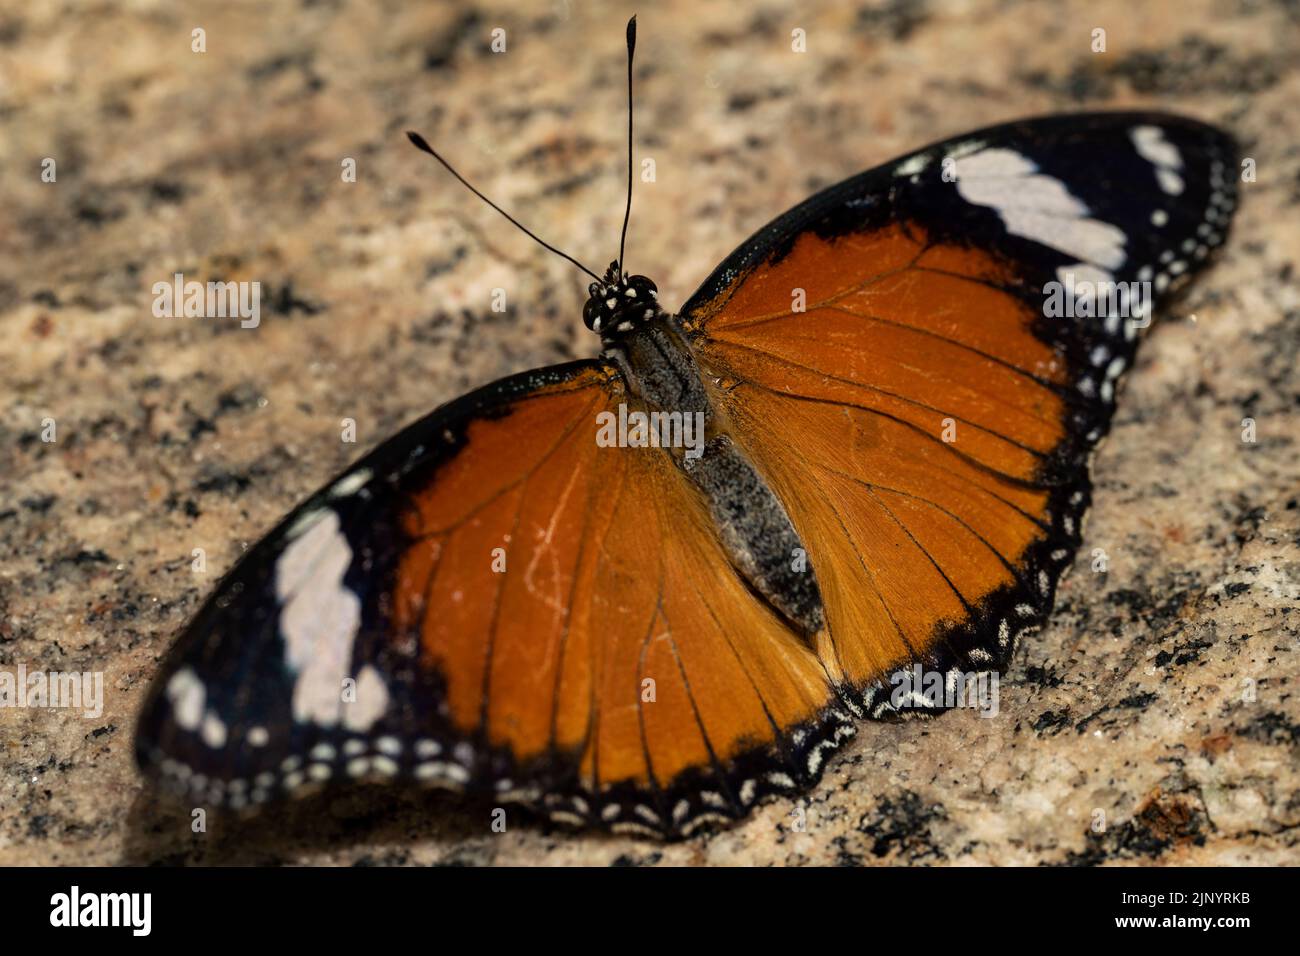 A plain tiger butterfly with wings spread. Stock Photo